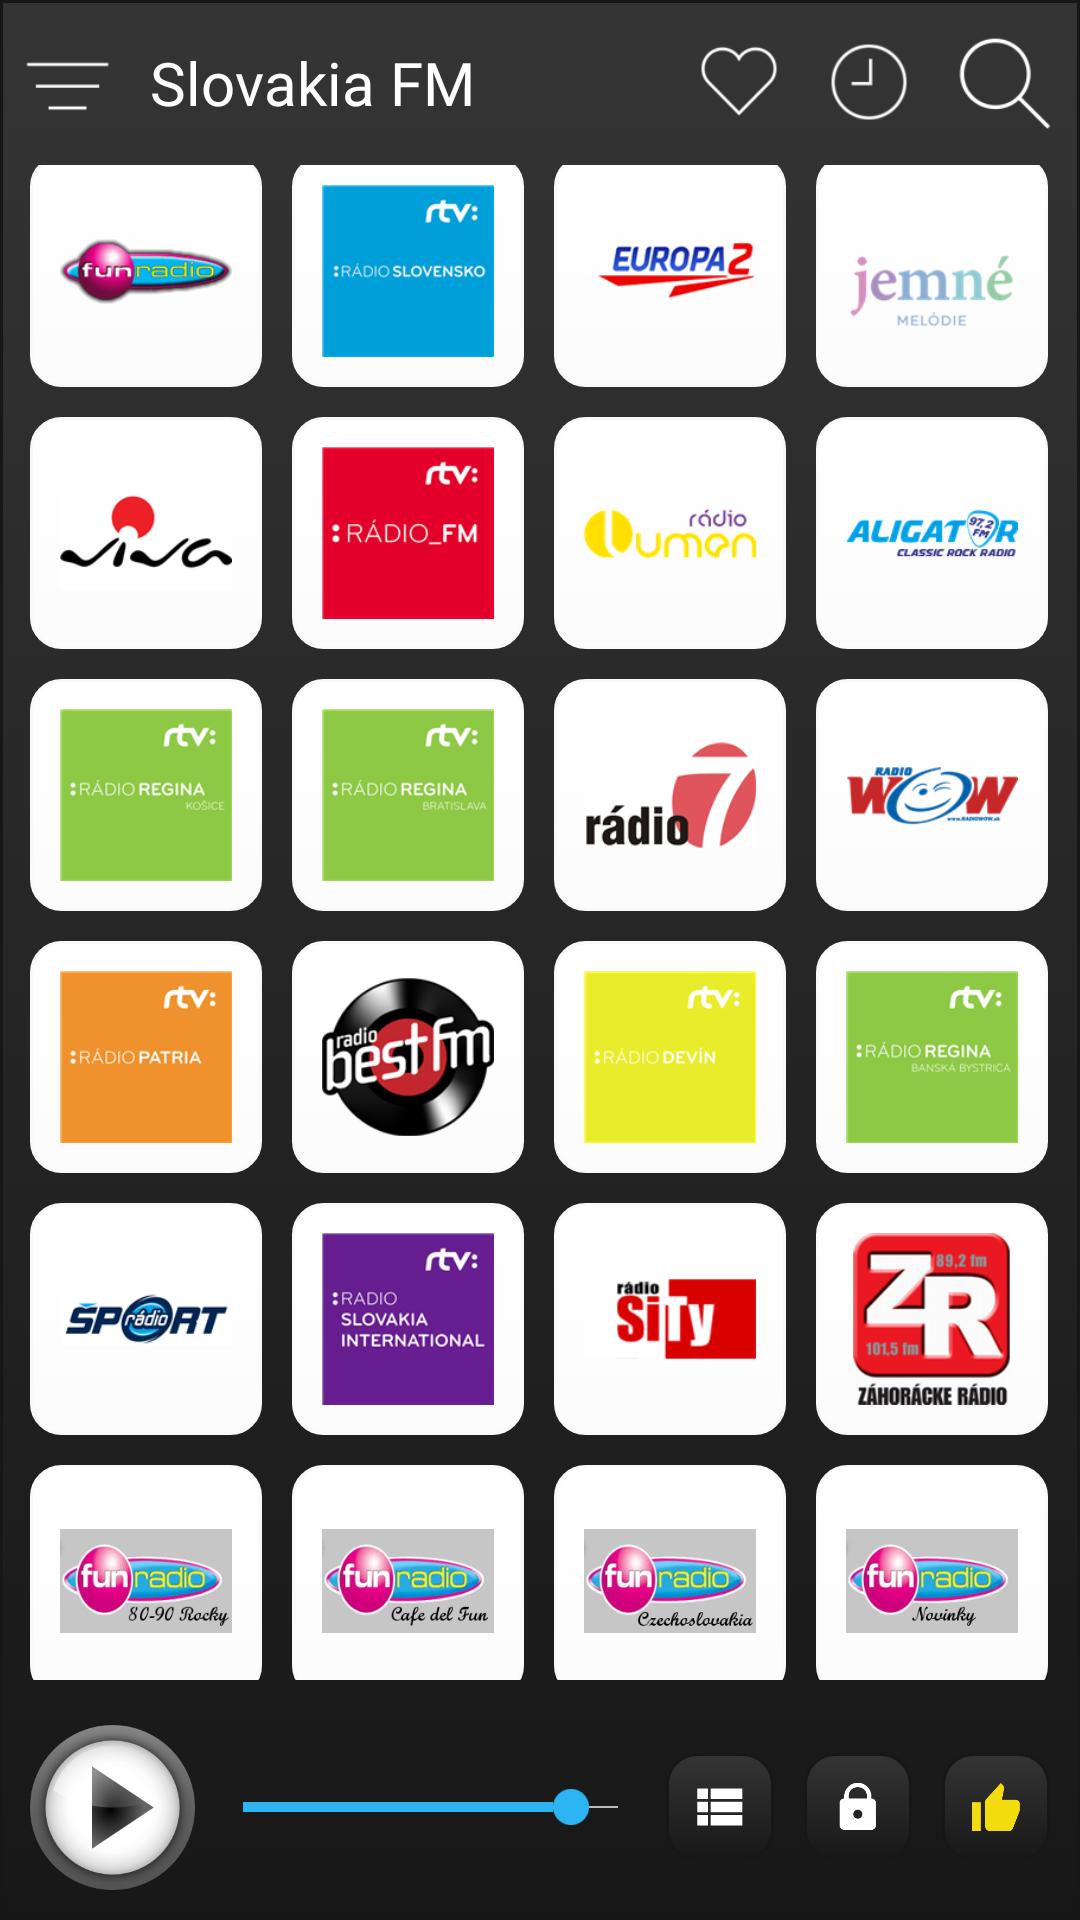 Slovakia Radio Stations Online - Slovensko FM AM for Android - APK Download